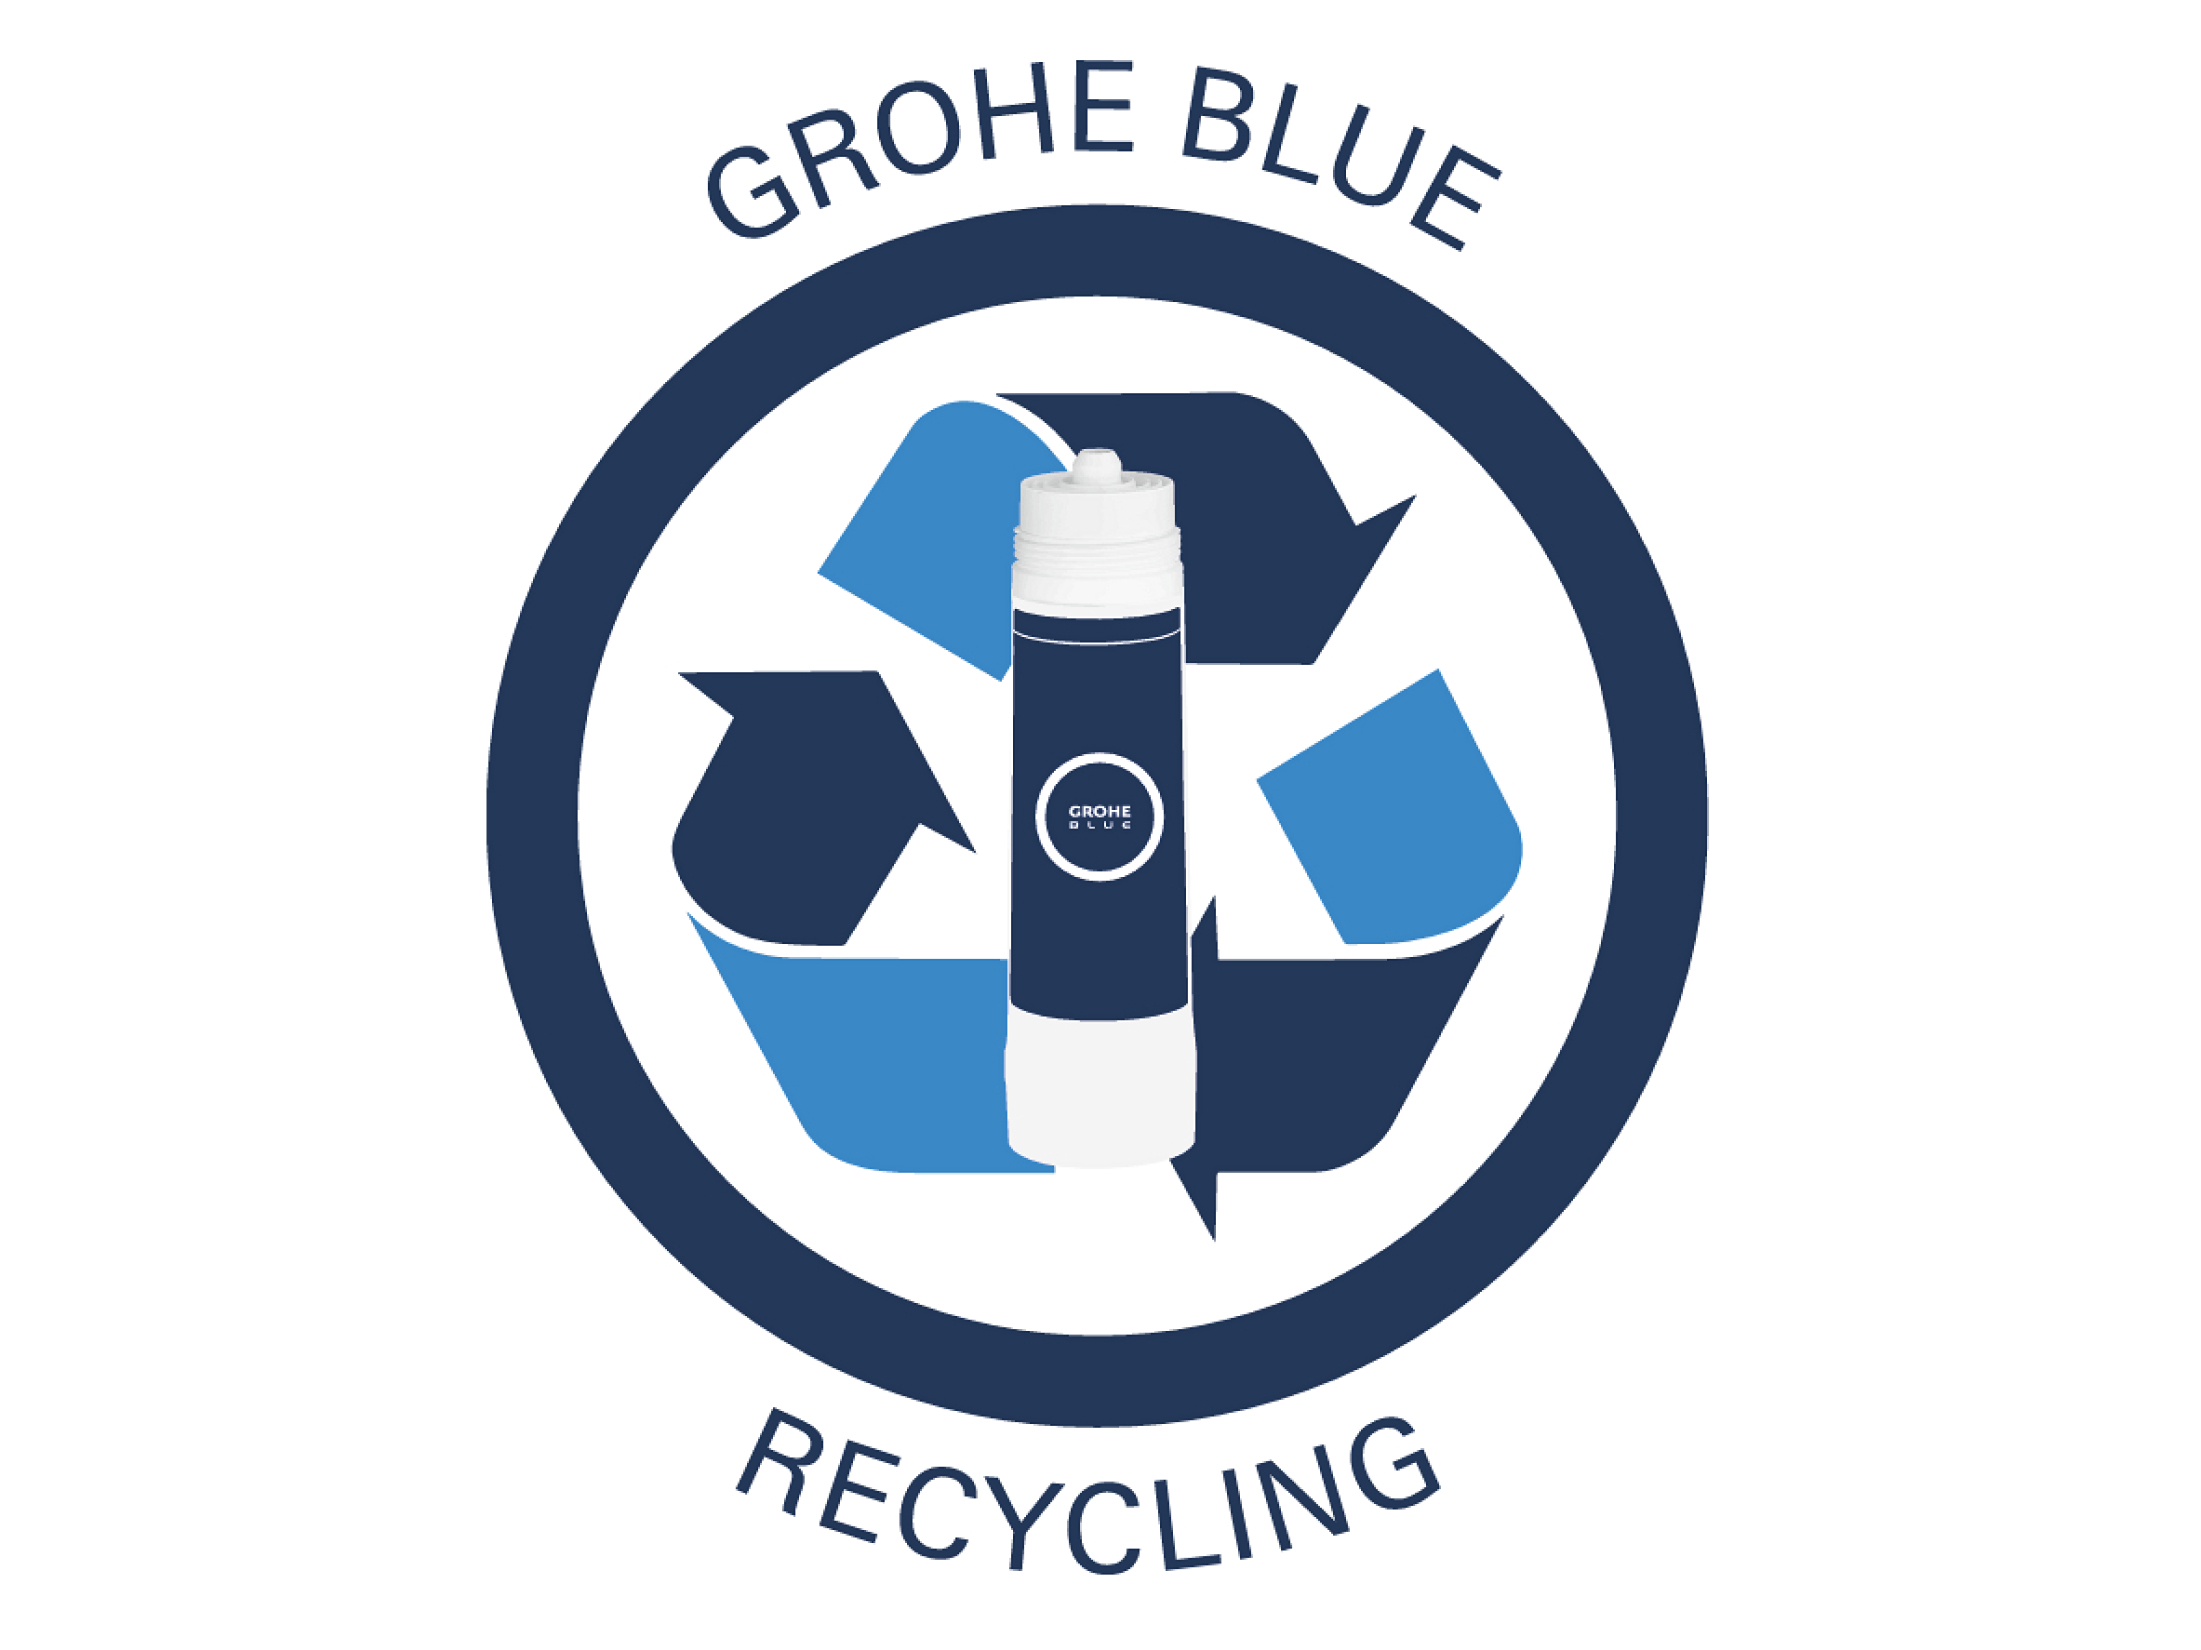 GROHE Blue Recycling